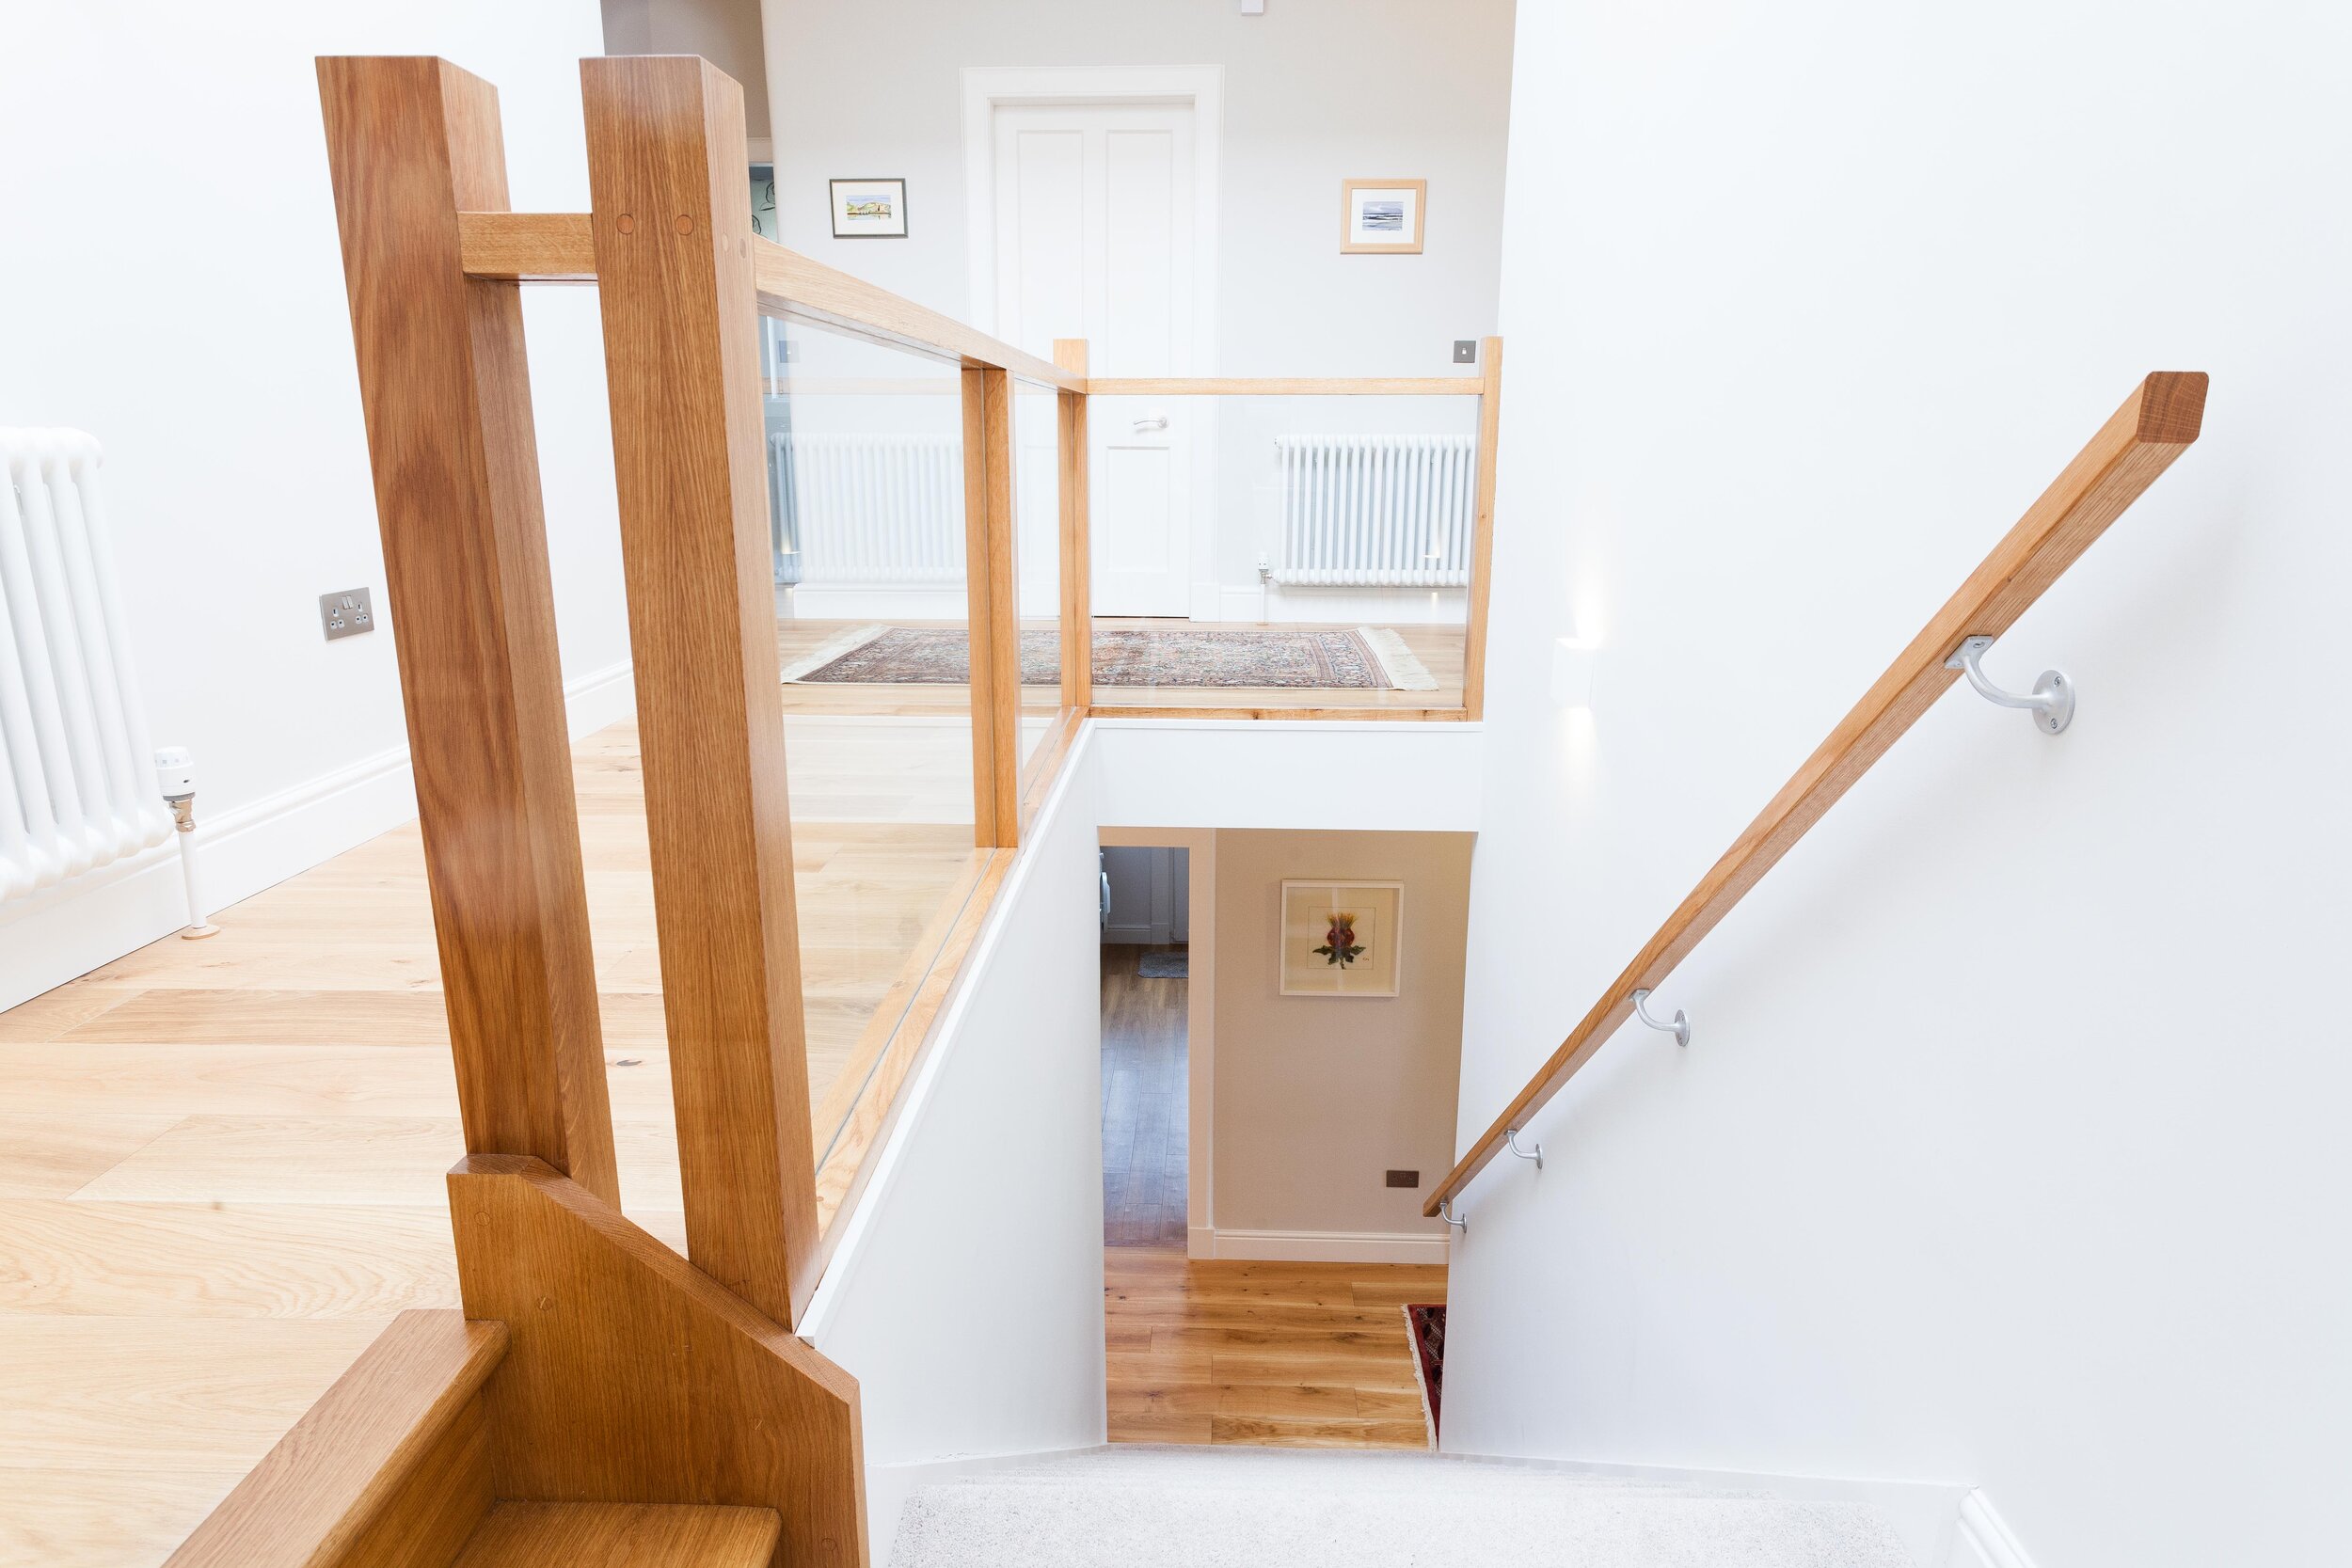  A glass balustrade allows natural light to reach the ground floor hall. 